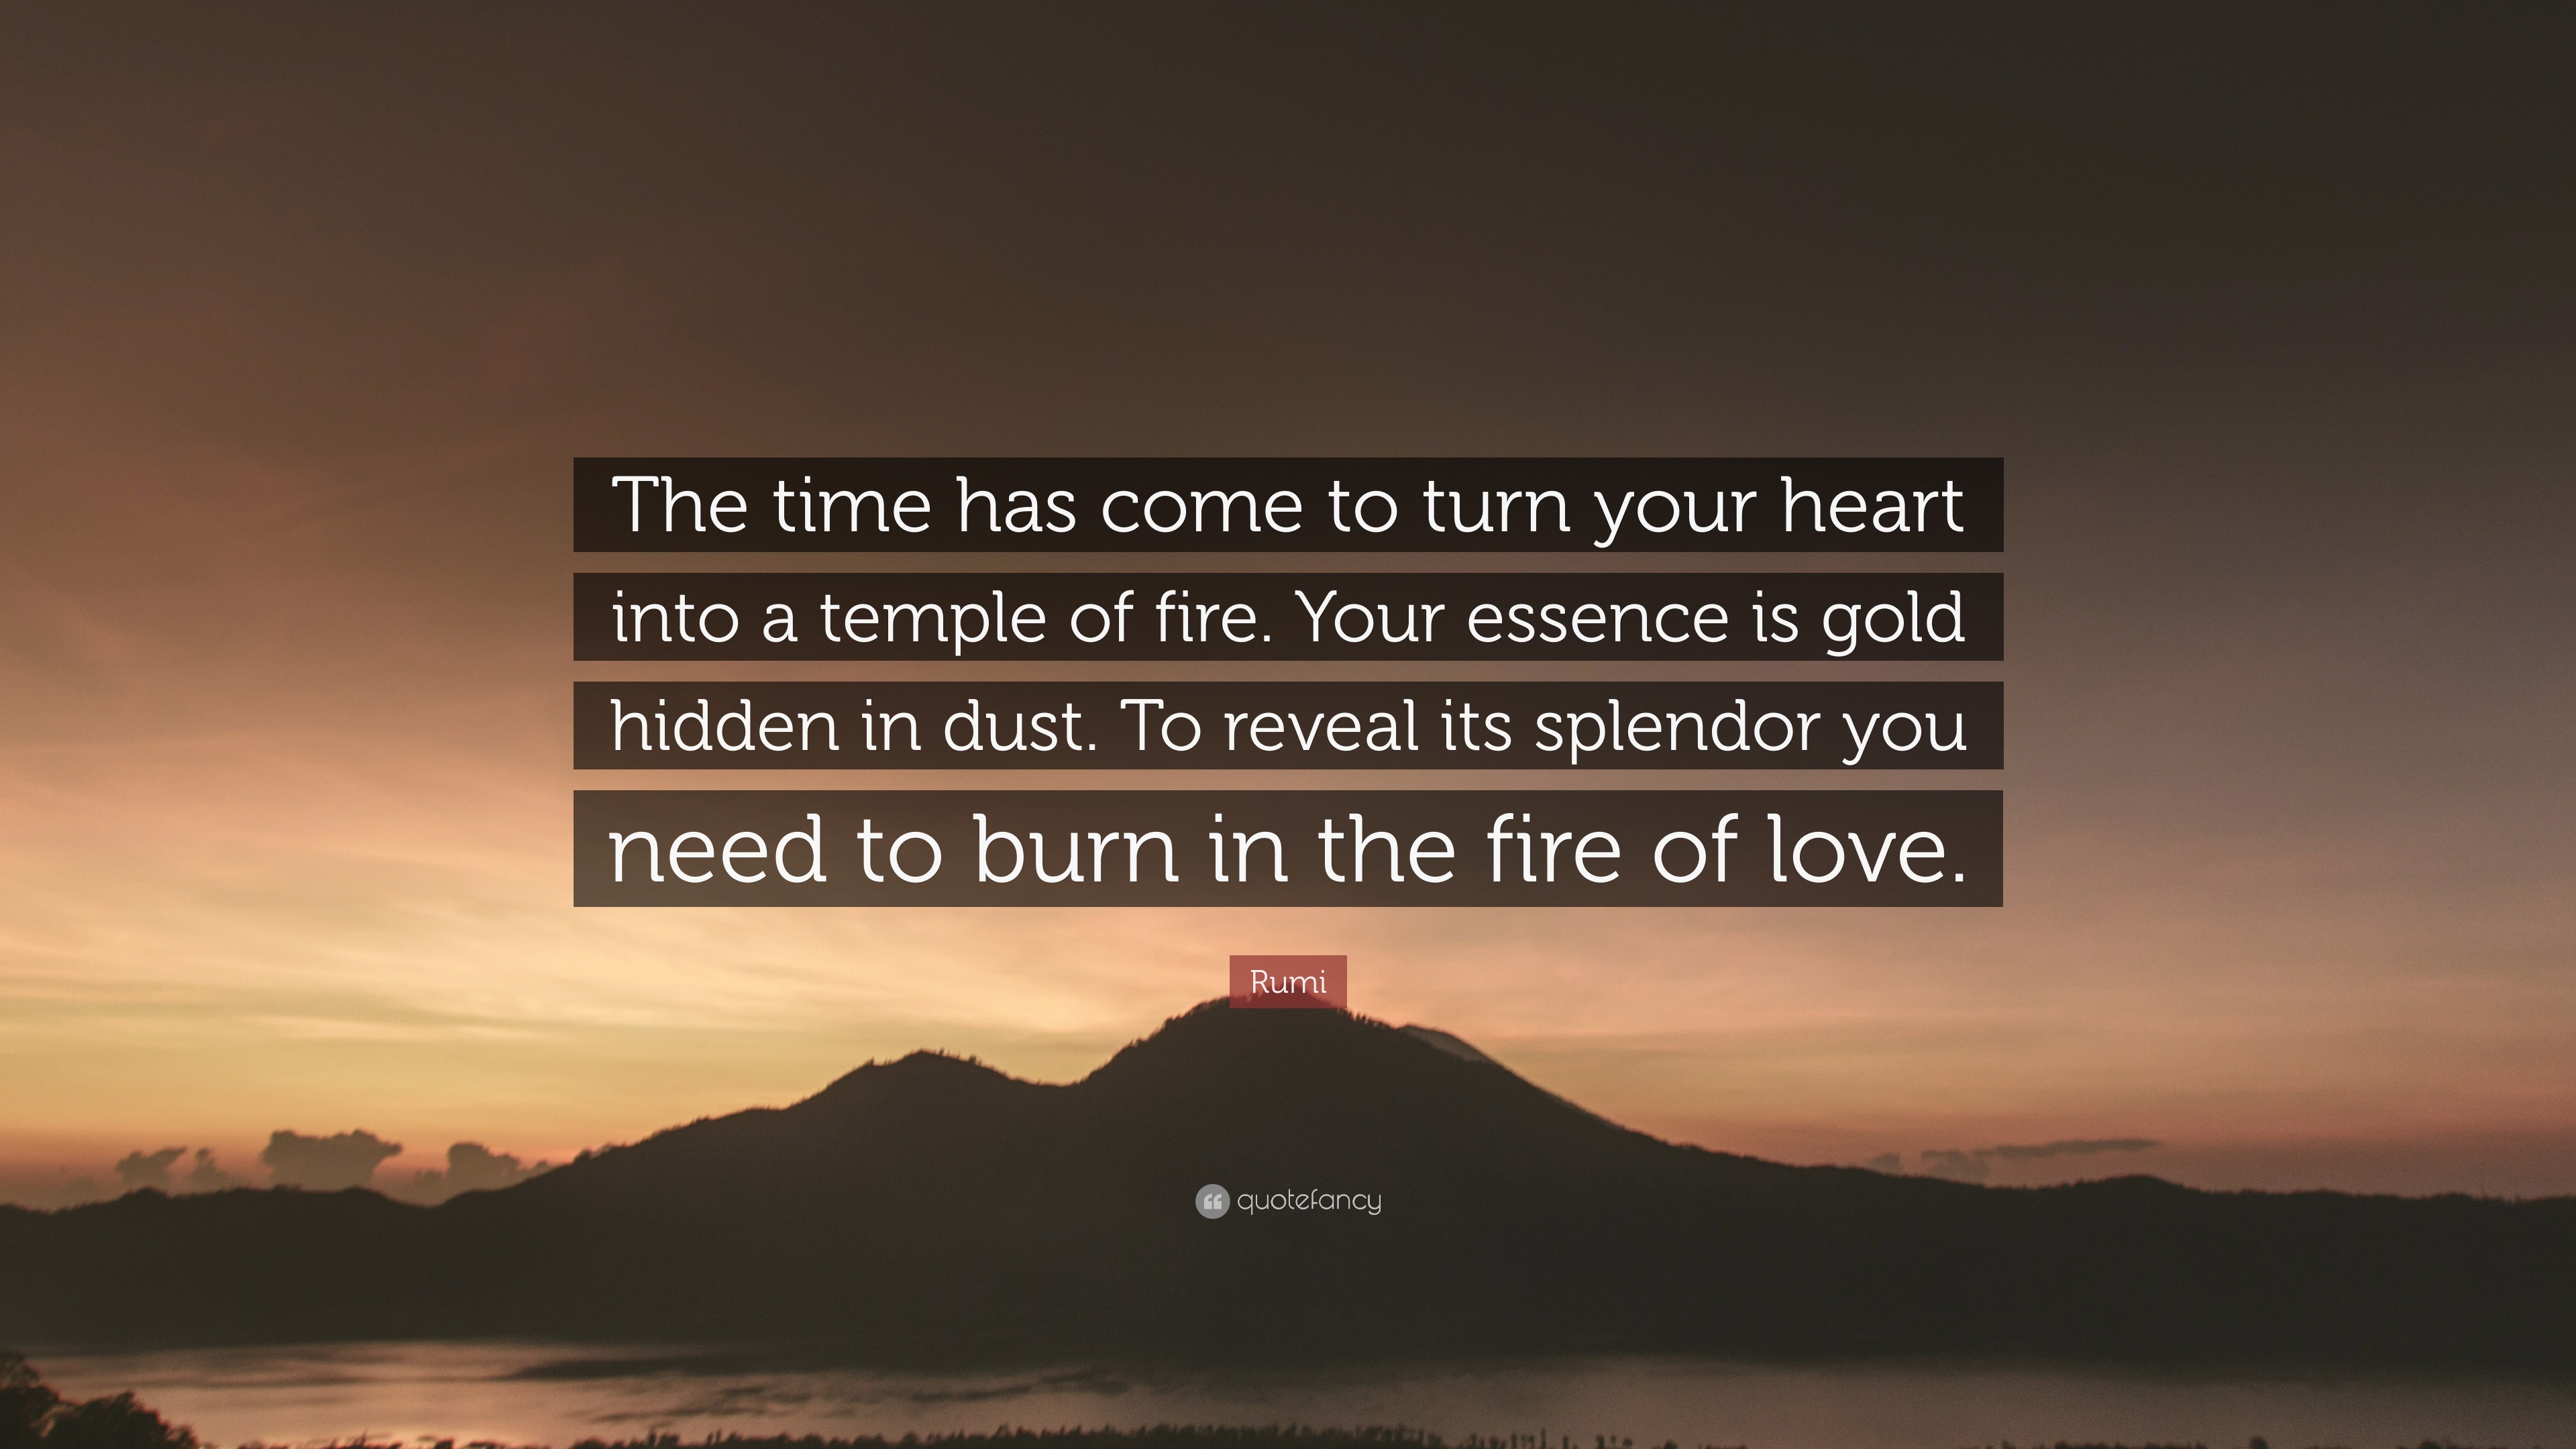 Rumi Quote: “The time has come to turn your heart into a temple of fire.  Your essence is gold hidden in dust. To reveal its splendor ...”